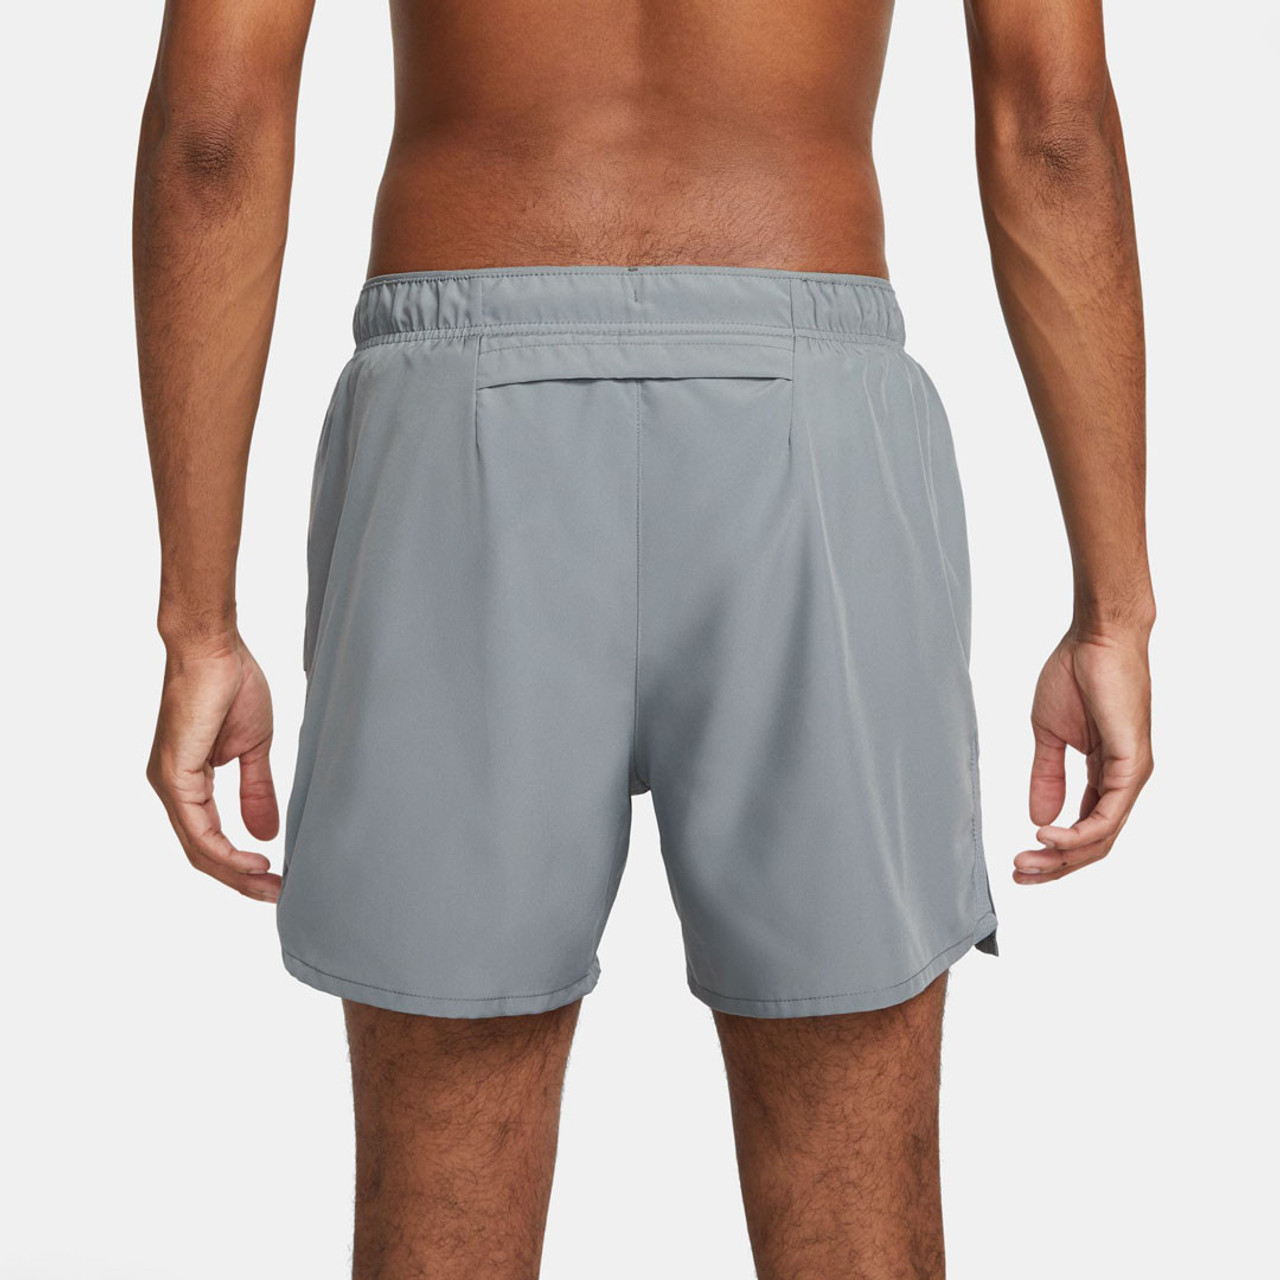 Men's Nike Dri-FIT Challenger 5 Brief-Lined Running Shorts